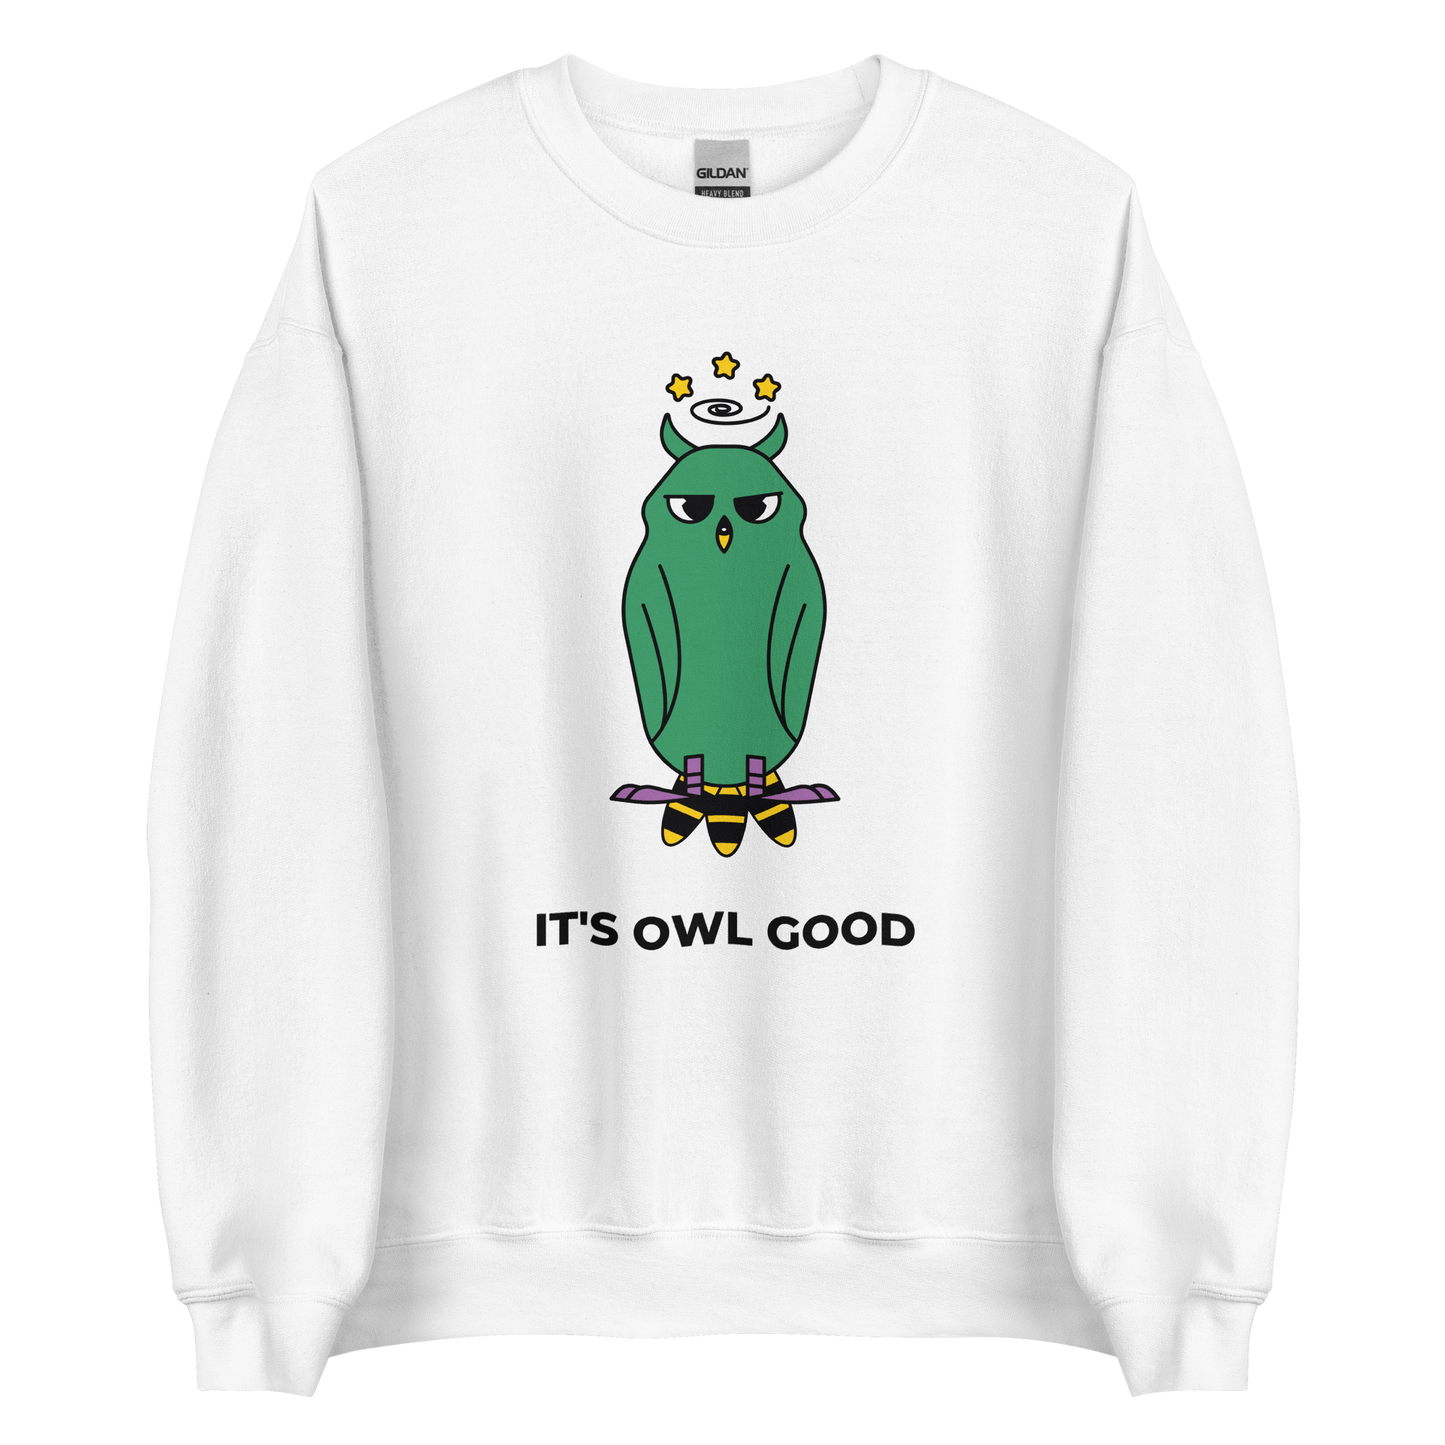 White Owl Sweatshirt featuring a captivating It's Owl Good graphic on the chest - Funny Graphic Owl Sweatshirts - Boozy Fox